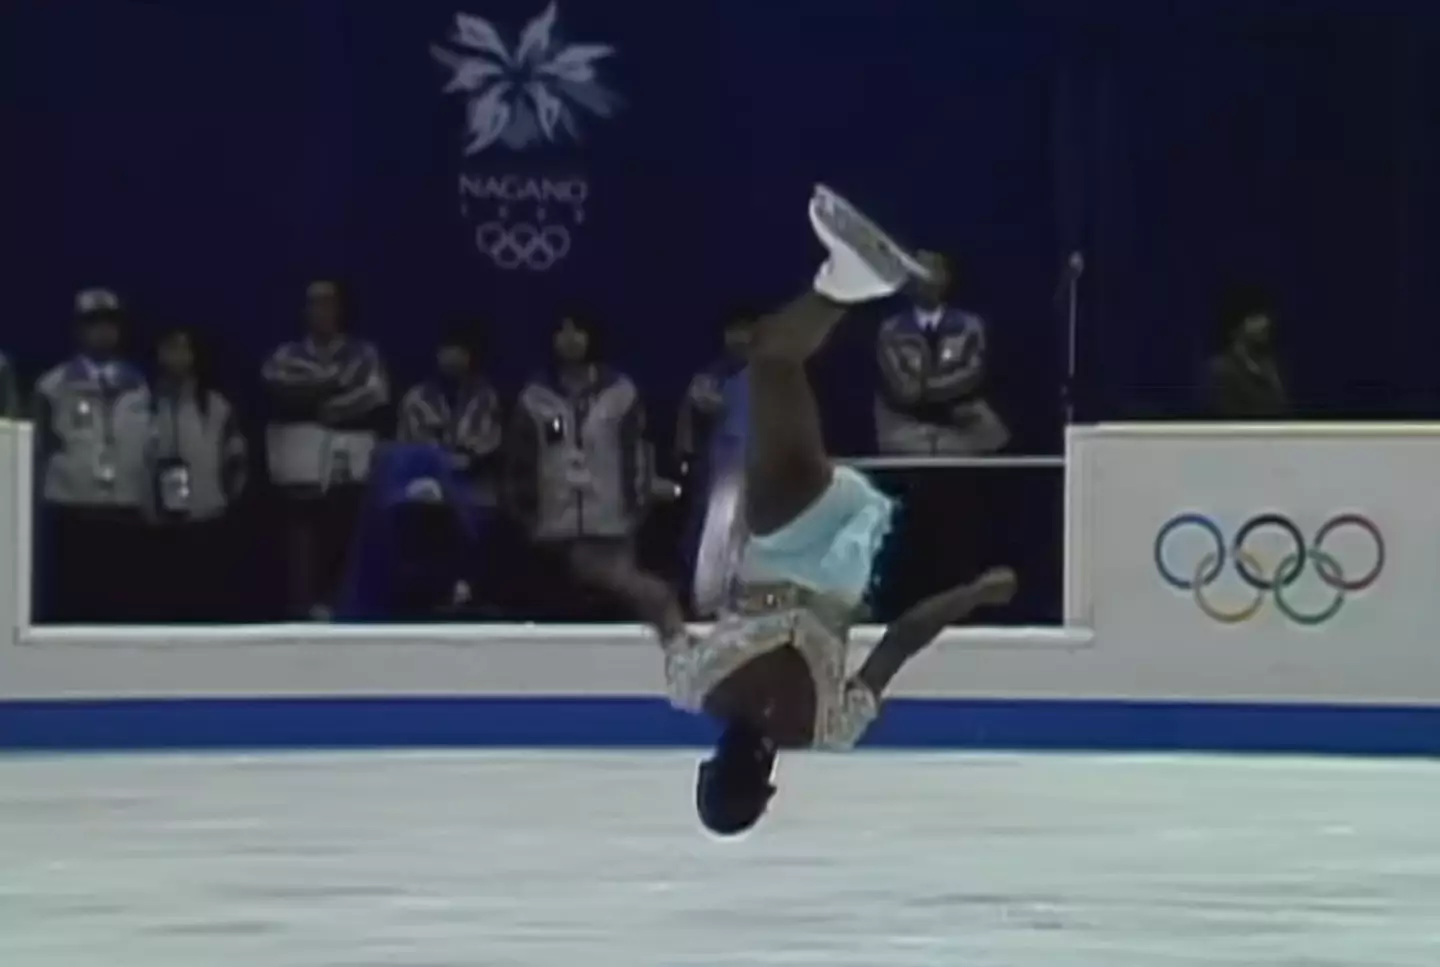 Surya Bonaly is the only Olympic figure skater who has managed to pull off a one-blade landing backflip.